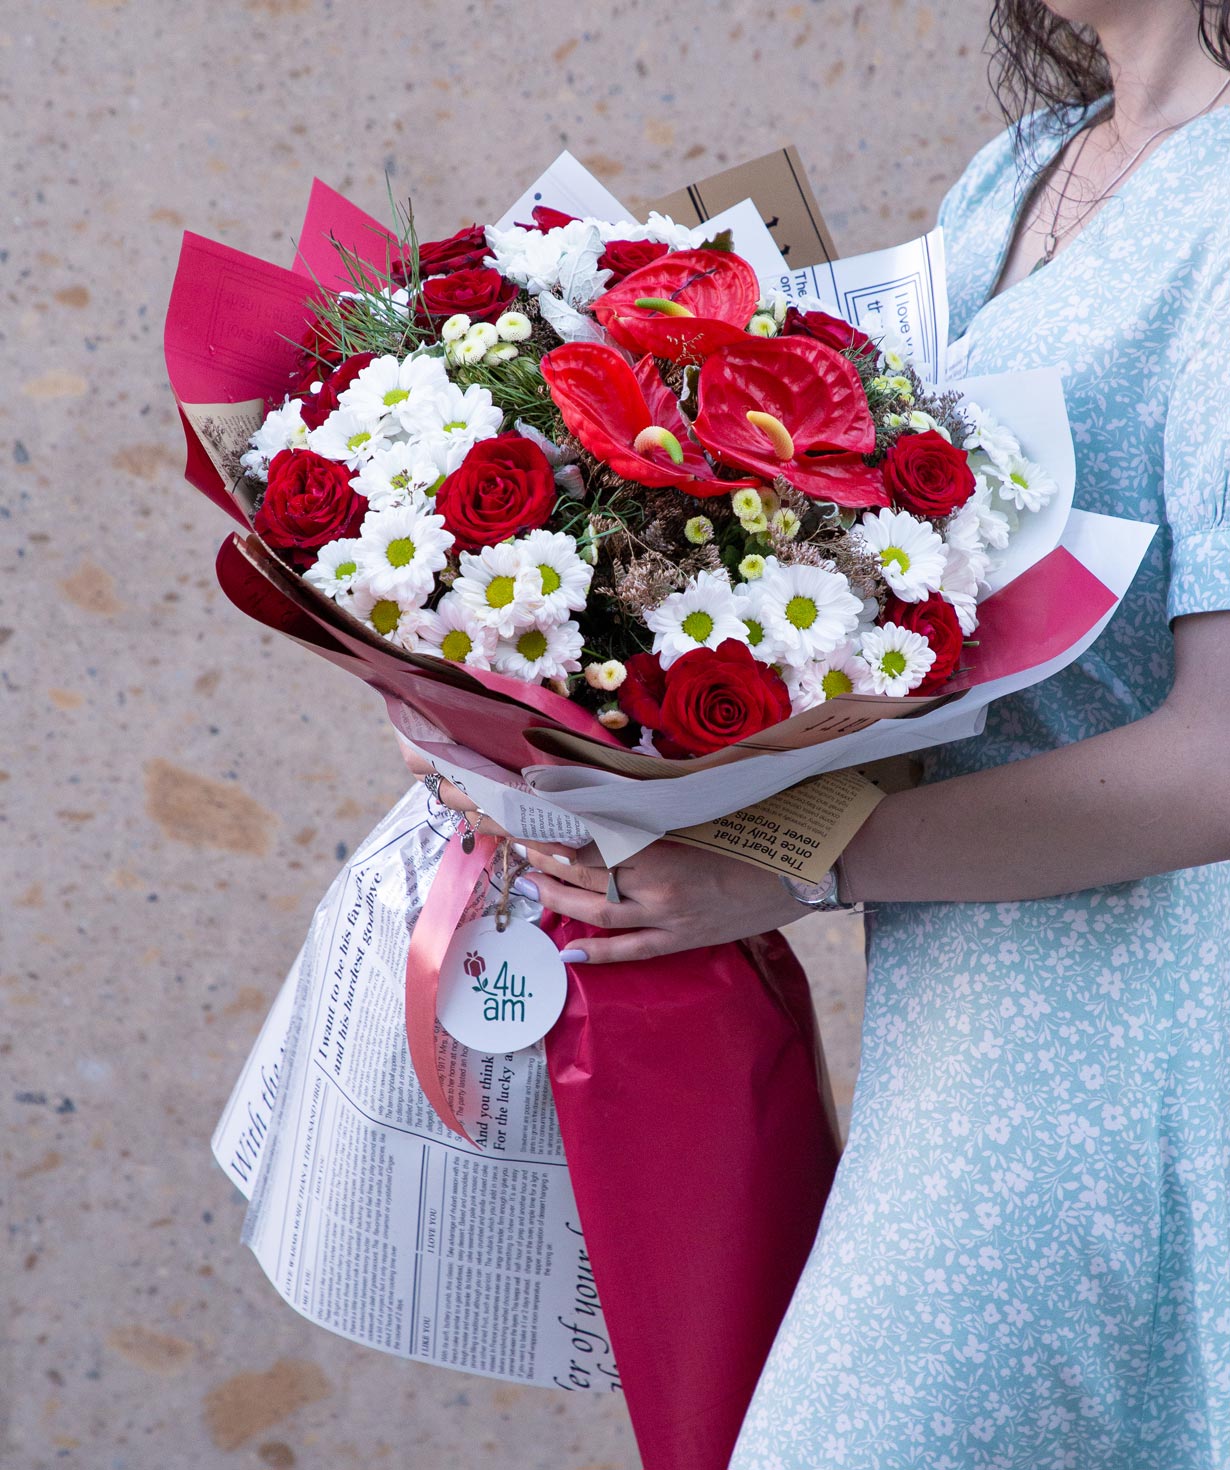 Bouquet `Limerick` with roses, chrysanthemums and anthuriums